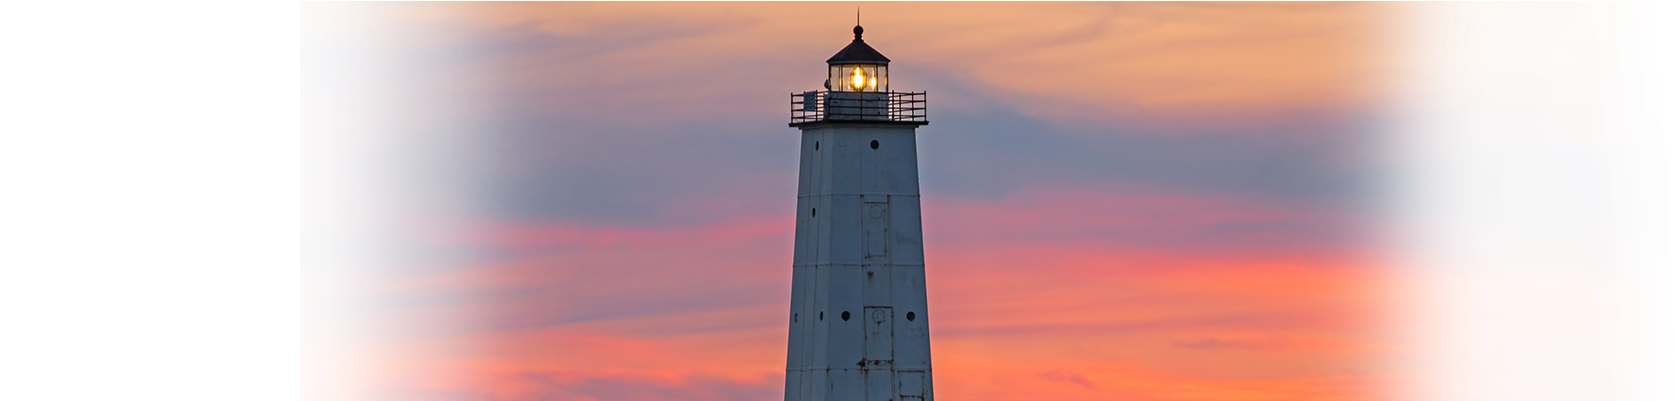 The Calm Setting Is Appropriate Considering This Lighthouse - Observation Tower (1920x400)